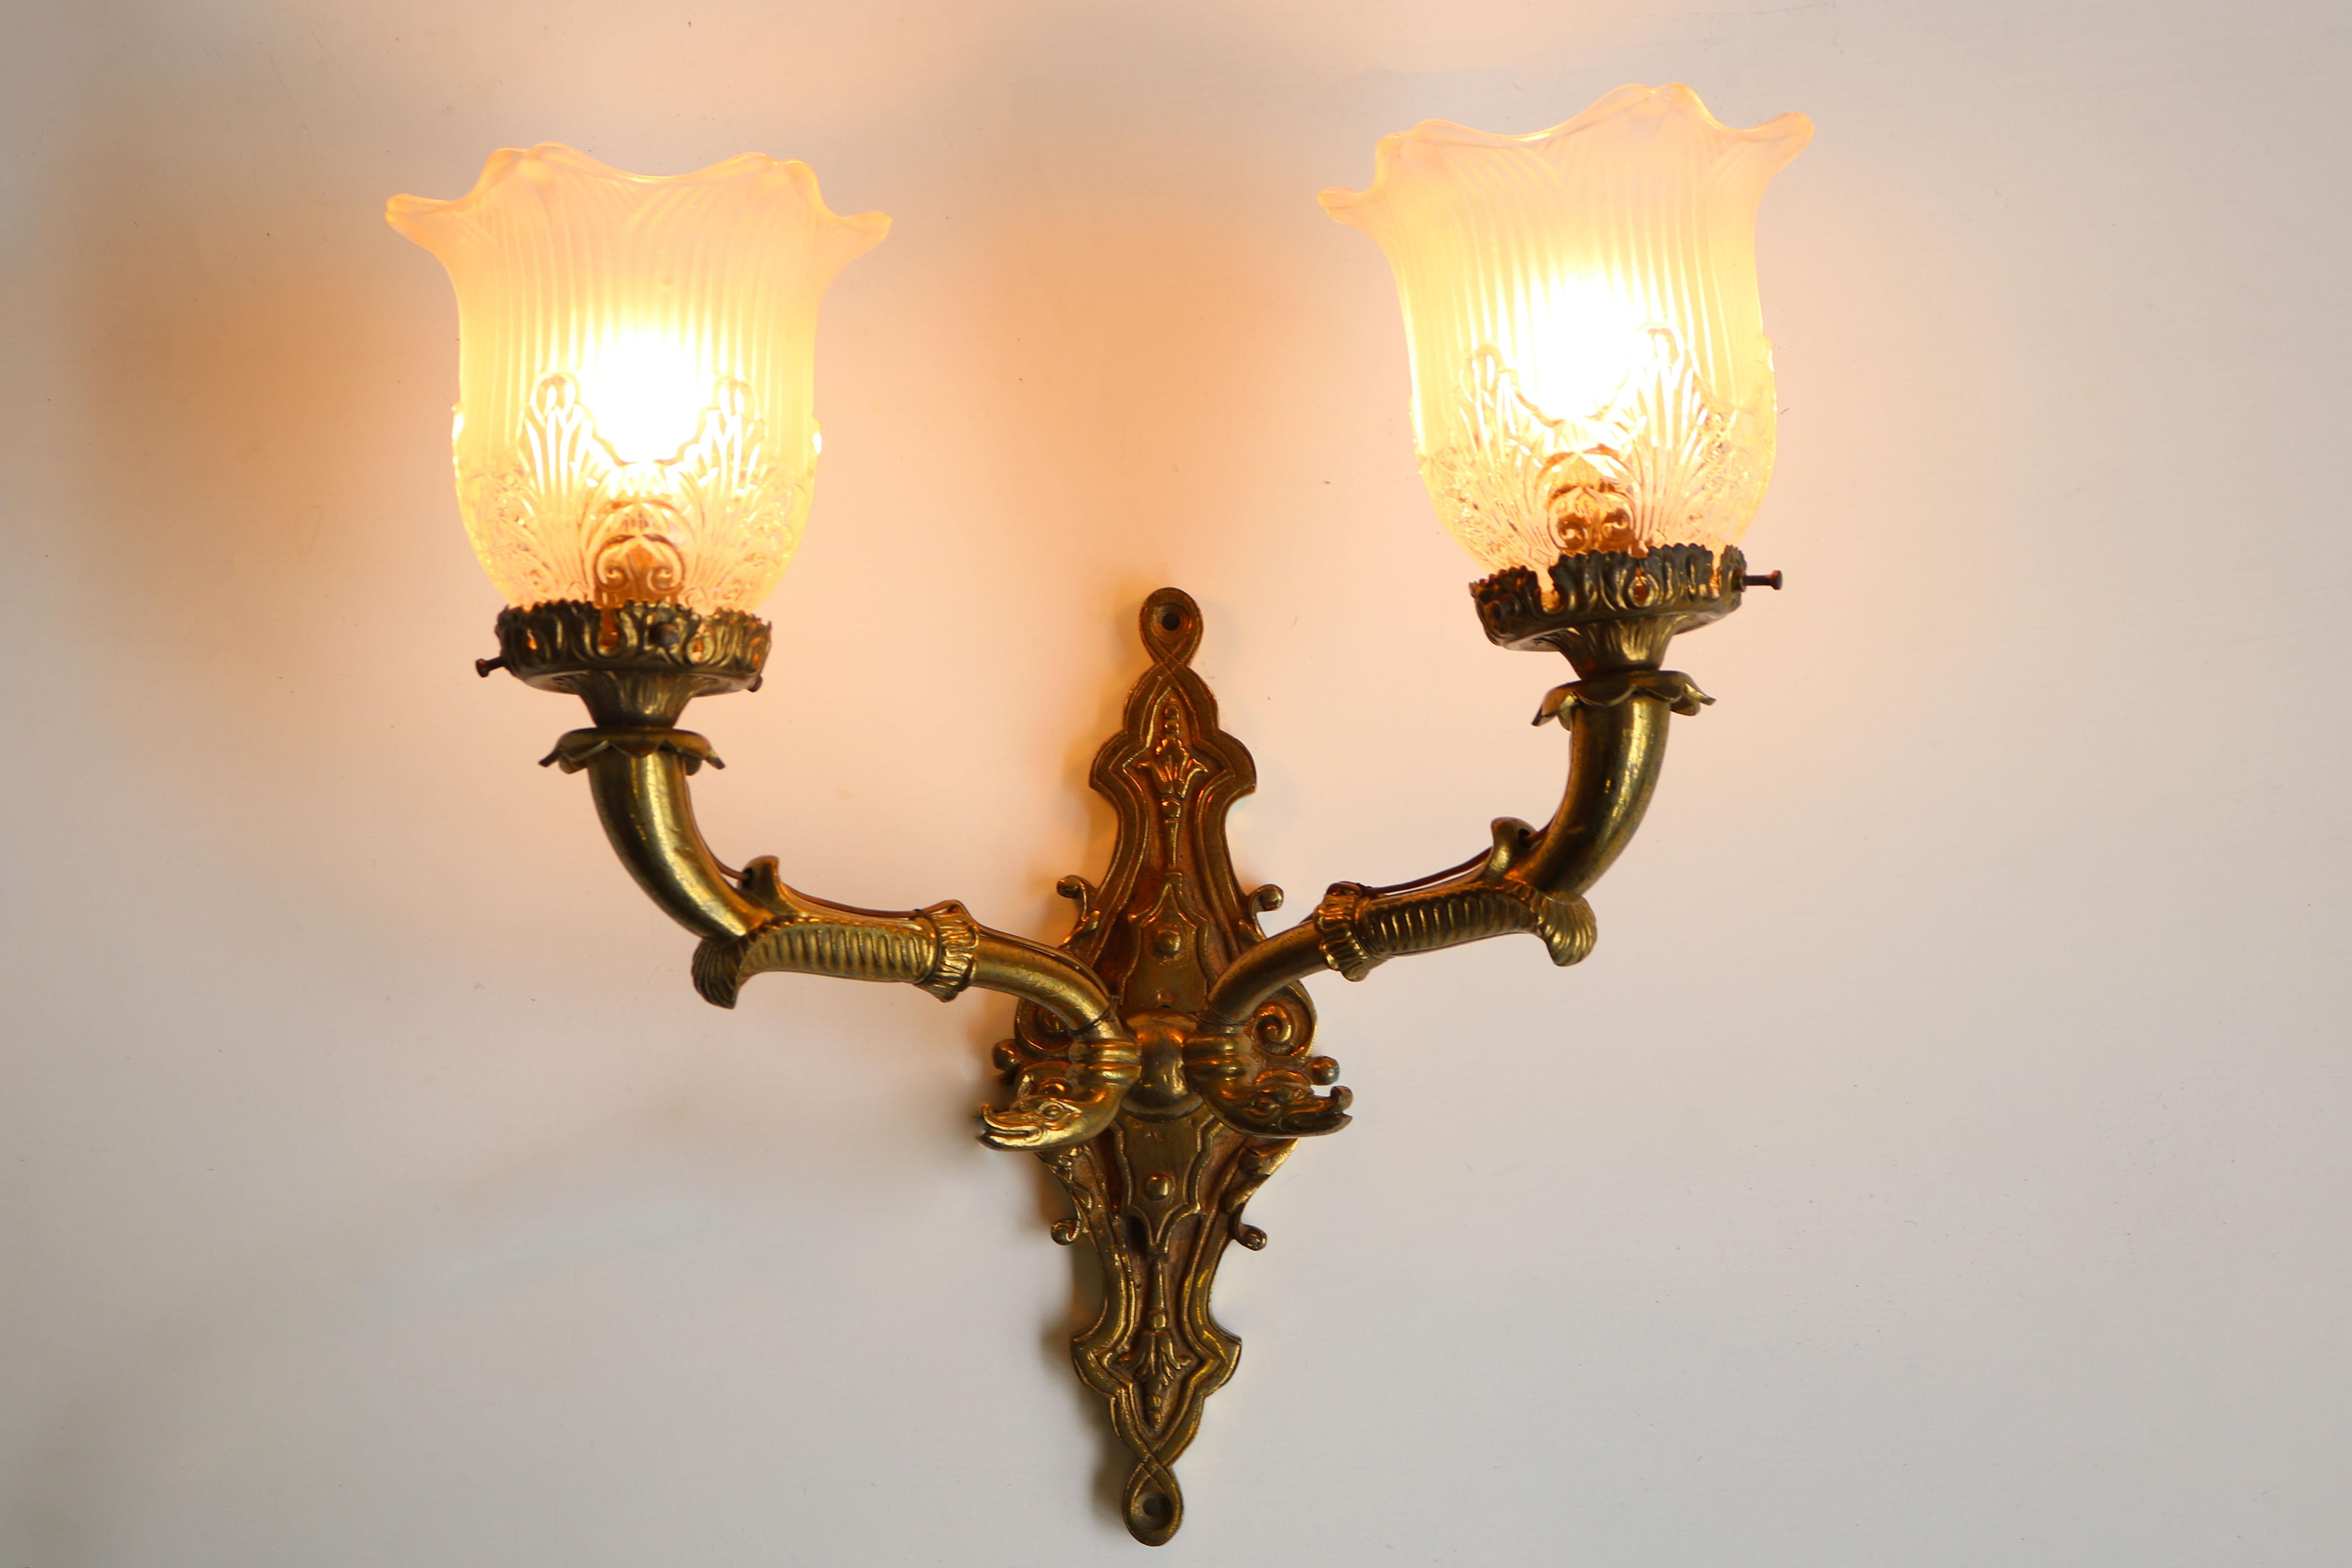 Pair of gorgeous large Empire 19th century wall lights in brass with clear & frosted glass shades. 
They have a real royal & luxury feeling and looking amazing when lit ! 
Fully original and stunning with Serpent head details. 
Each wall light